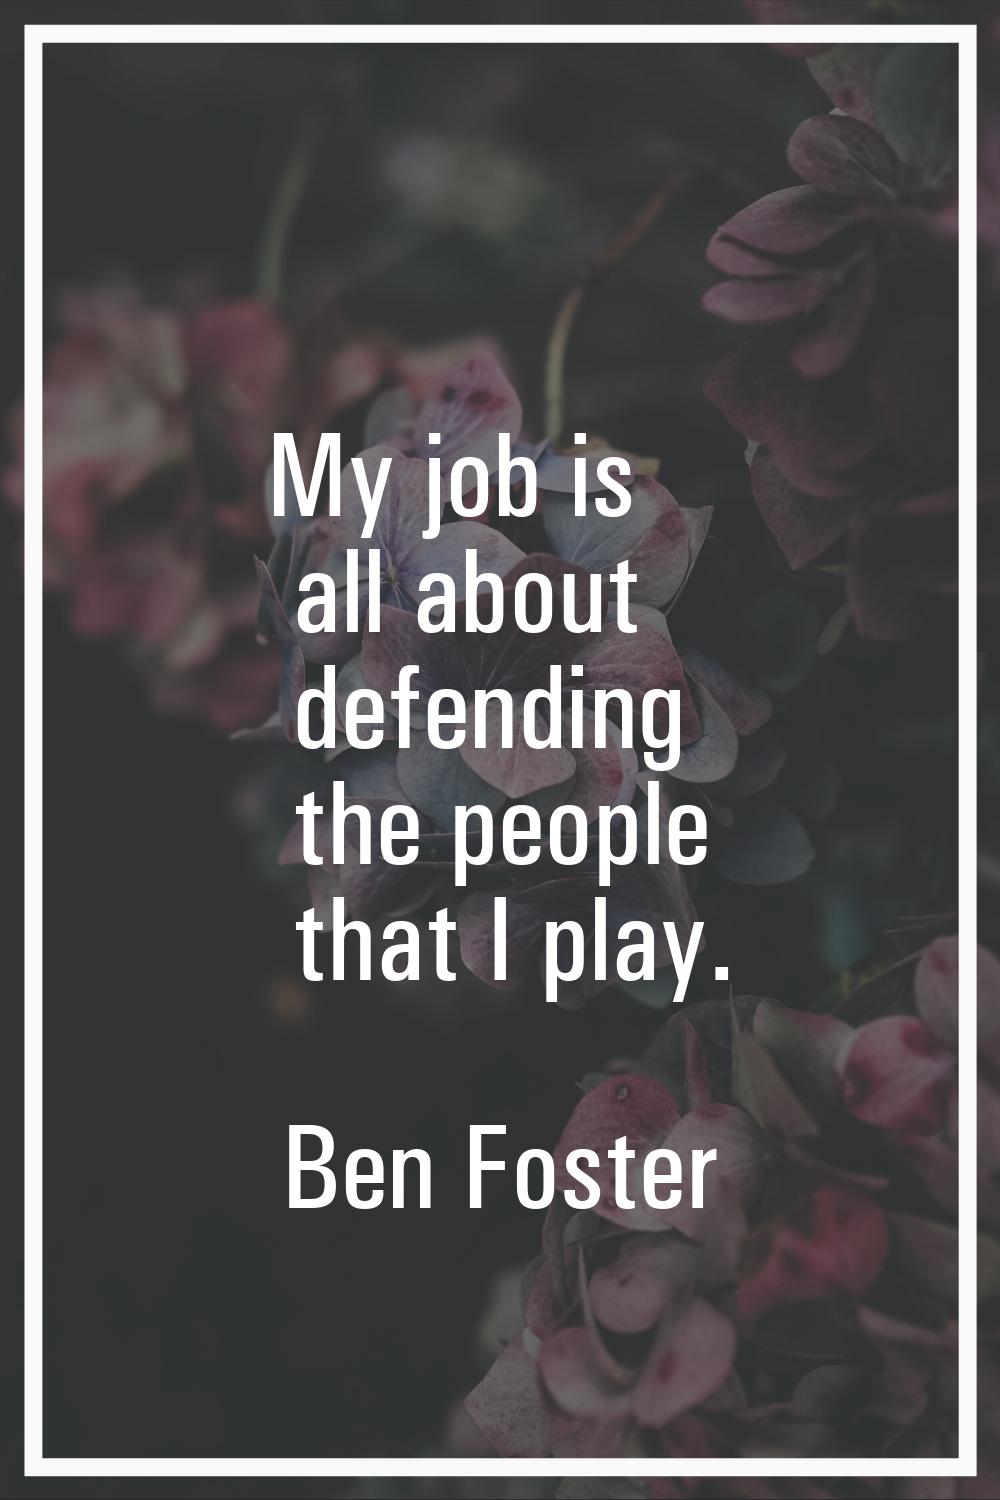 My job is all about defending the people that I play.